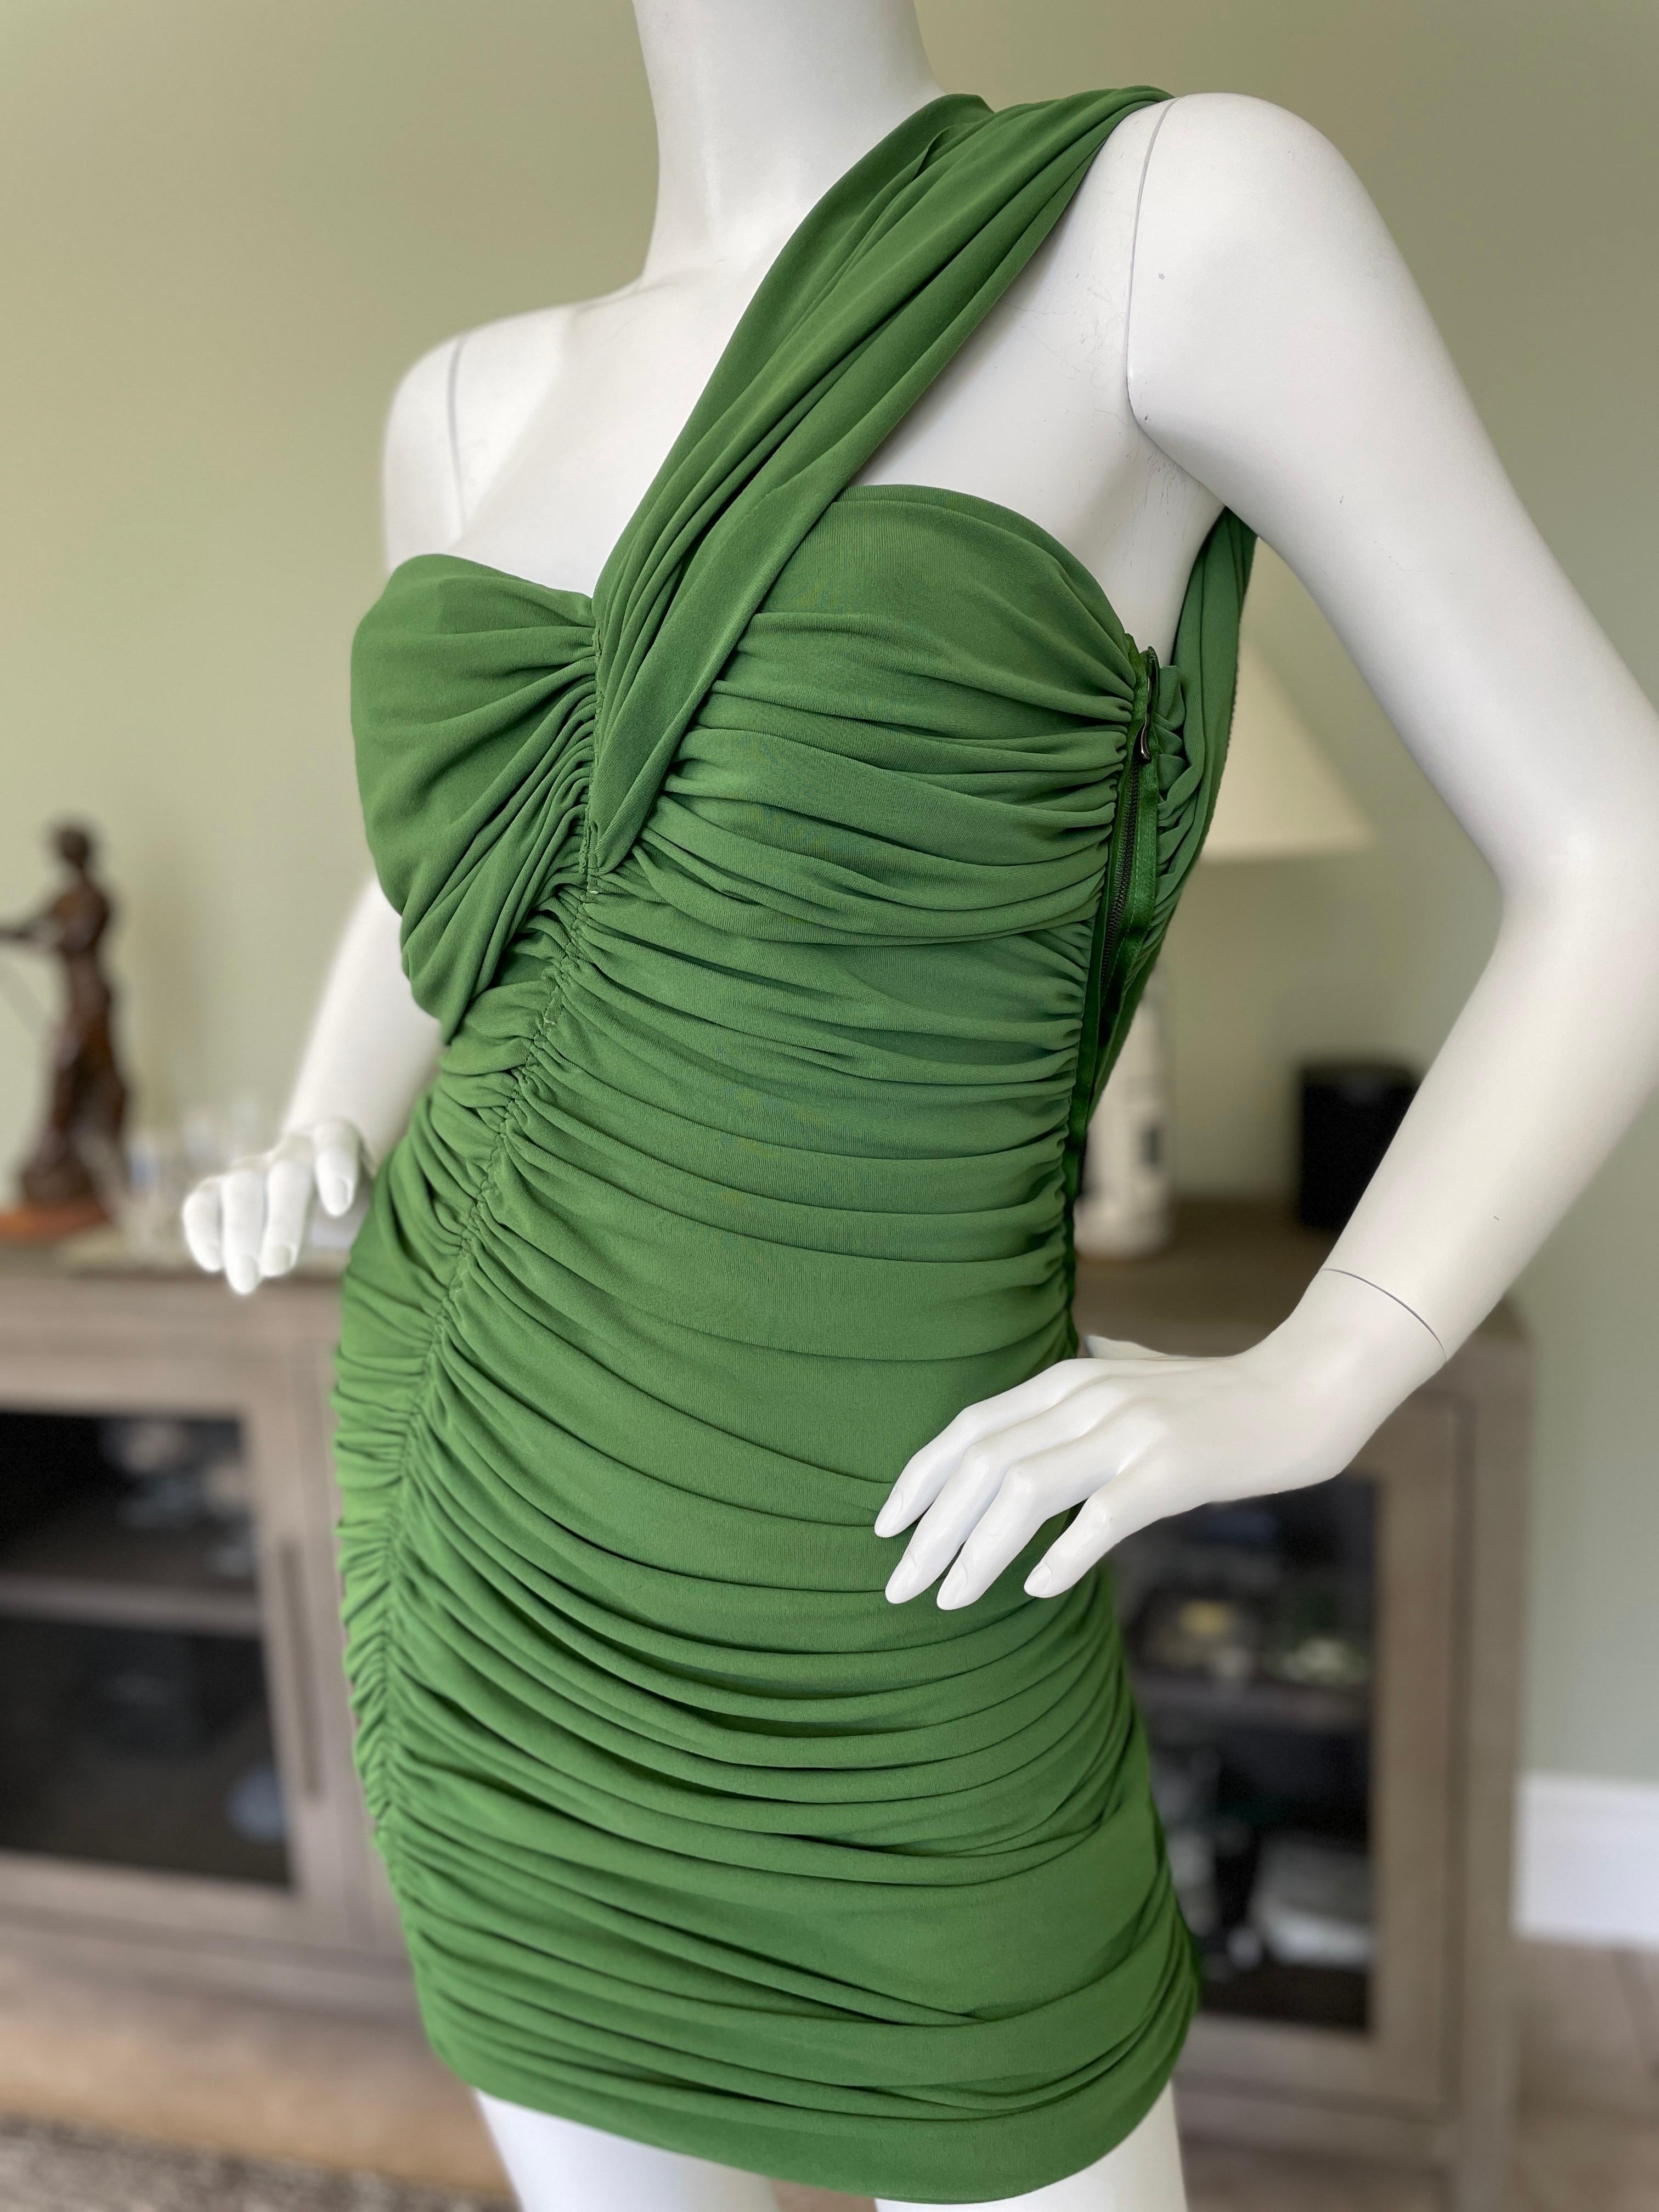 Lanvin by Alber Elbaz Ruched Green One Shoulder Mini Dress from Spring 2012.
 So beautiful, much prettier in person.
This is exquisite.
Size 42, there is a lot of stretch in this abric.
 Bust 34